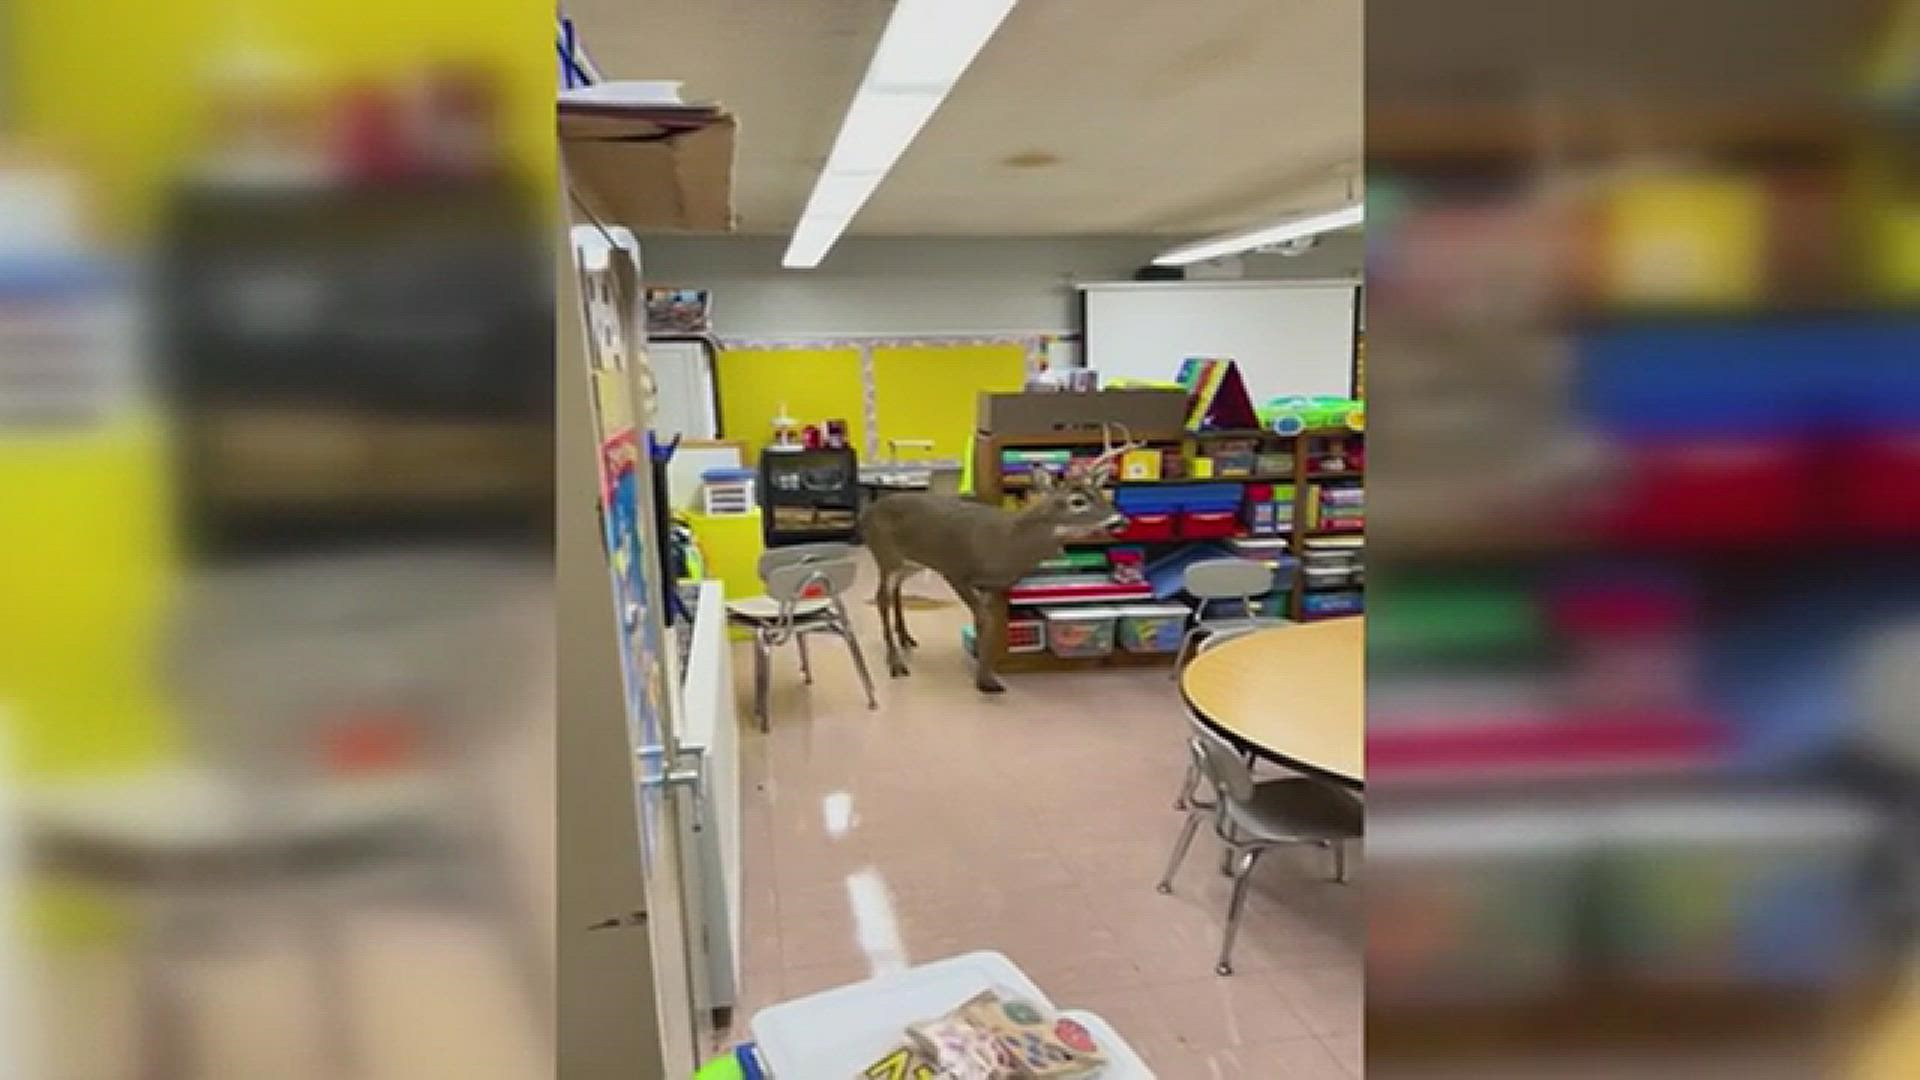 A deer crashed into a Tennessee elementary school through the emergency exit then hung out in the building all night.